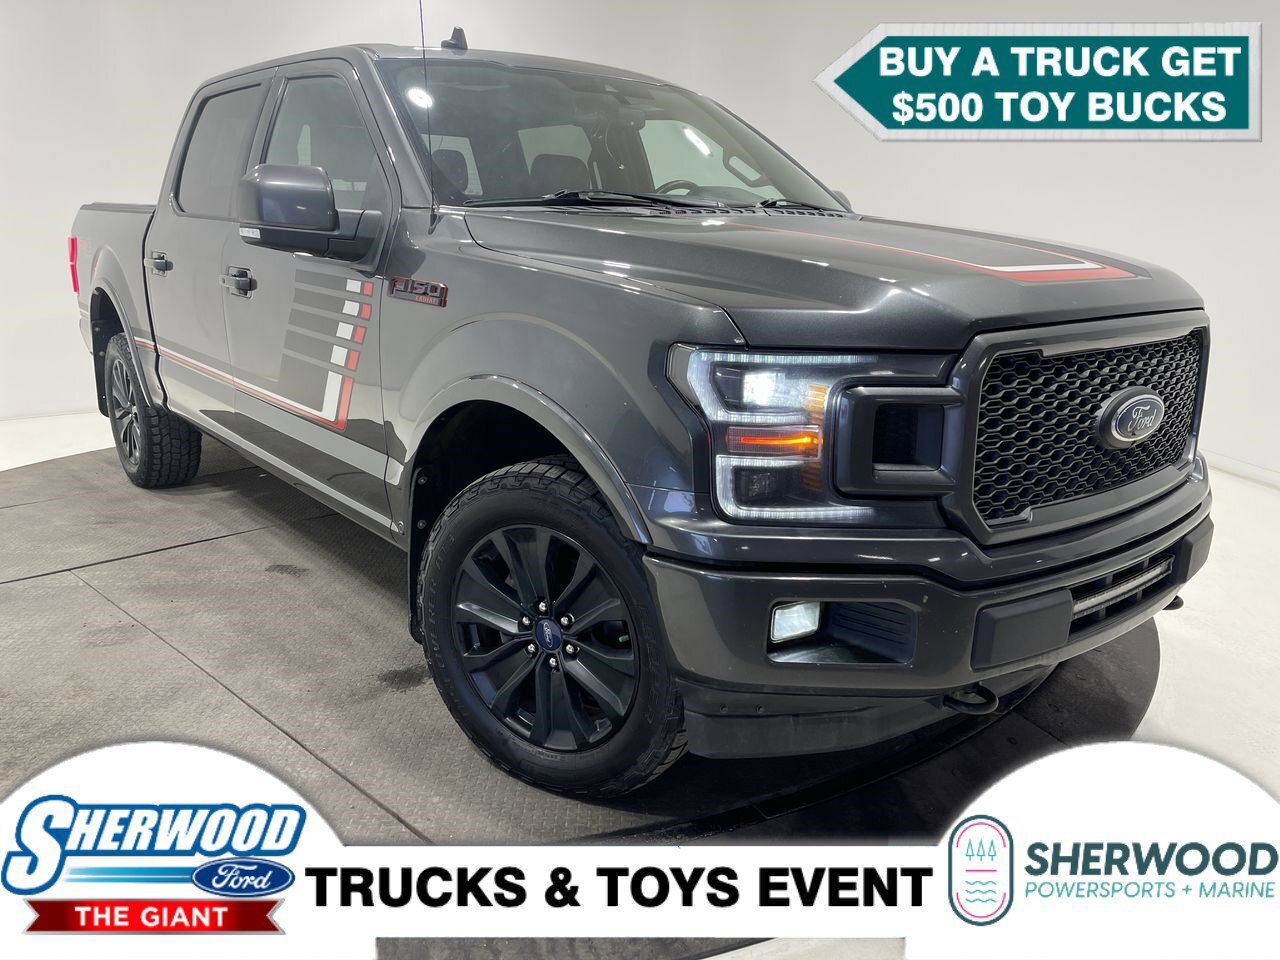 2019 Ford F-150 Lariat - $0 Down $153 Weekly - CLEAN CARFAX